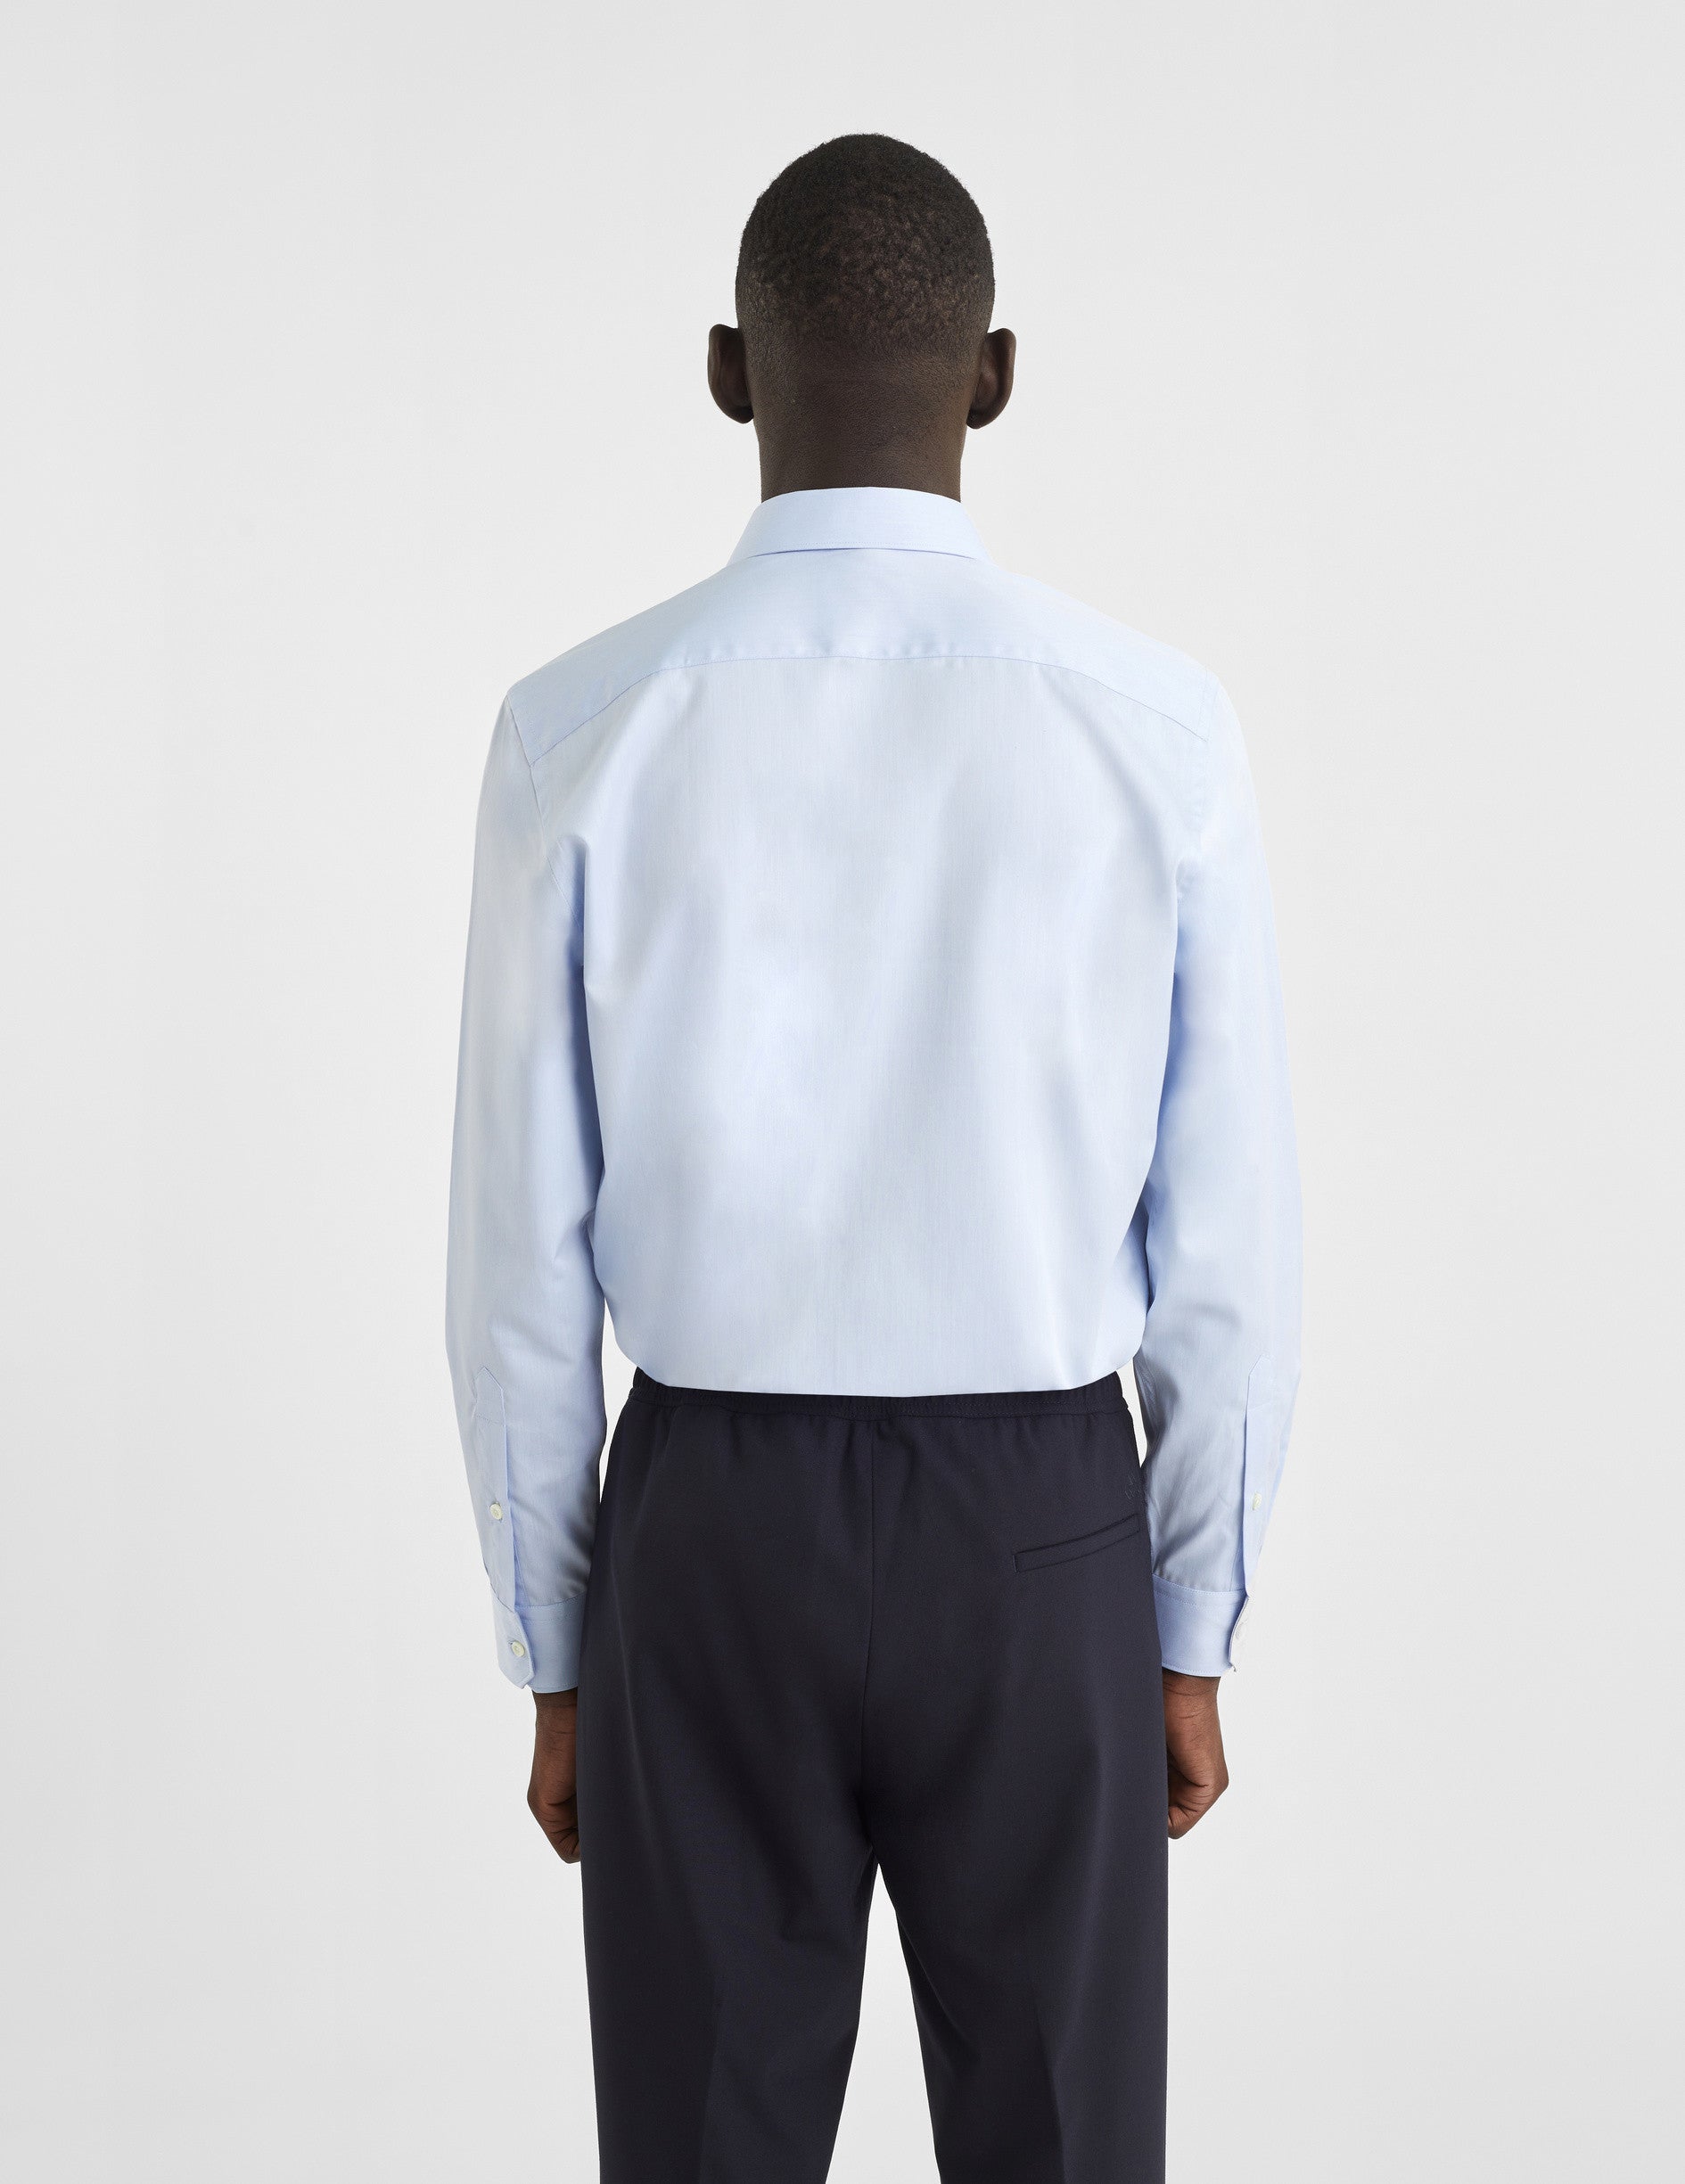 Semi-fitted blue shirt - Twill - Figaret Collar